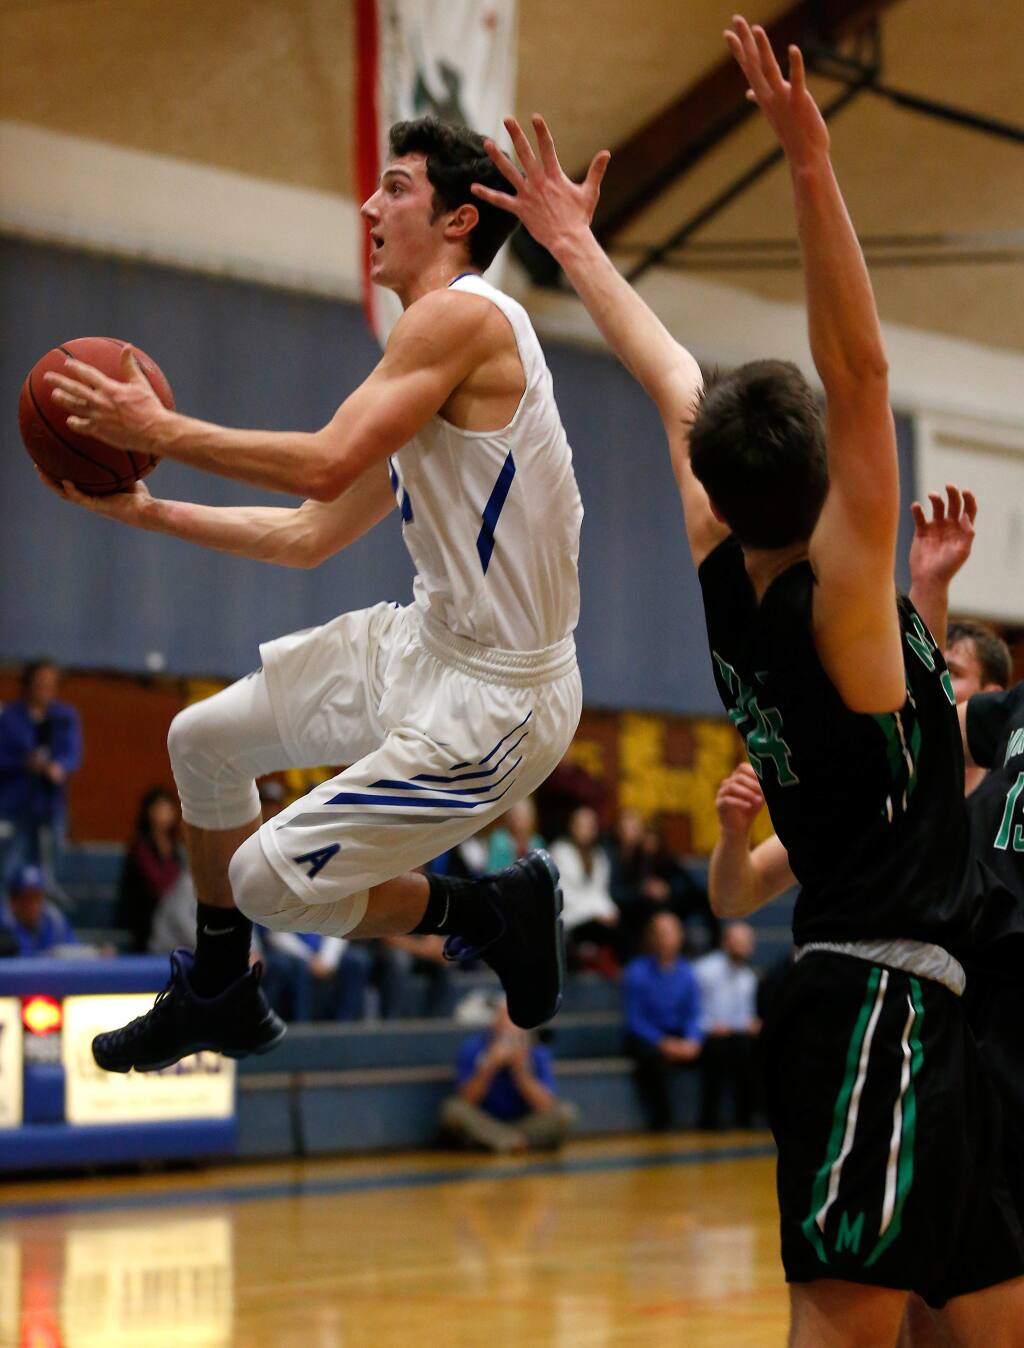 Analy's Dom Tripodi (11), left, leaps past Miramonte's Charlie Hocking (24) to score with a layup during the first half of the NCS Division 2 boys varsity basketball quarterfinal game between Miramonte and Analy high schools in Sebastopol, California on Friday, February 24, 2017. (Alvin Jornada / The Press Democrat)